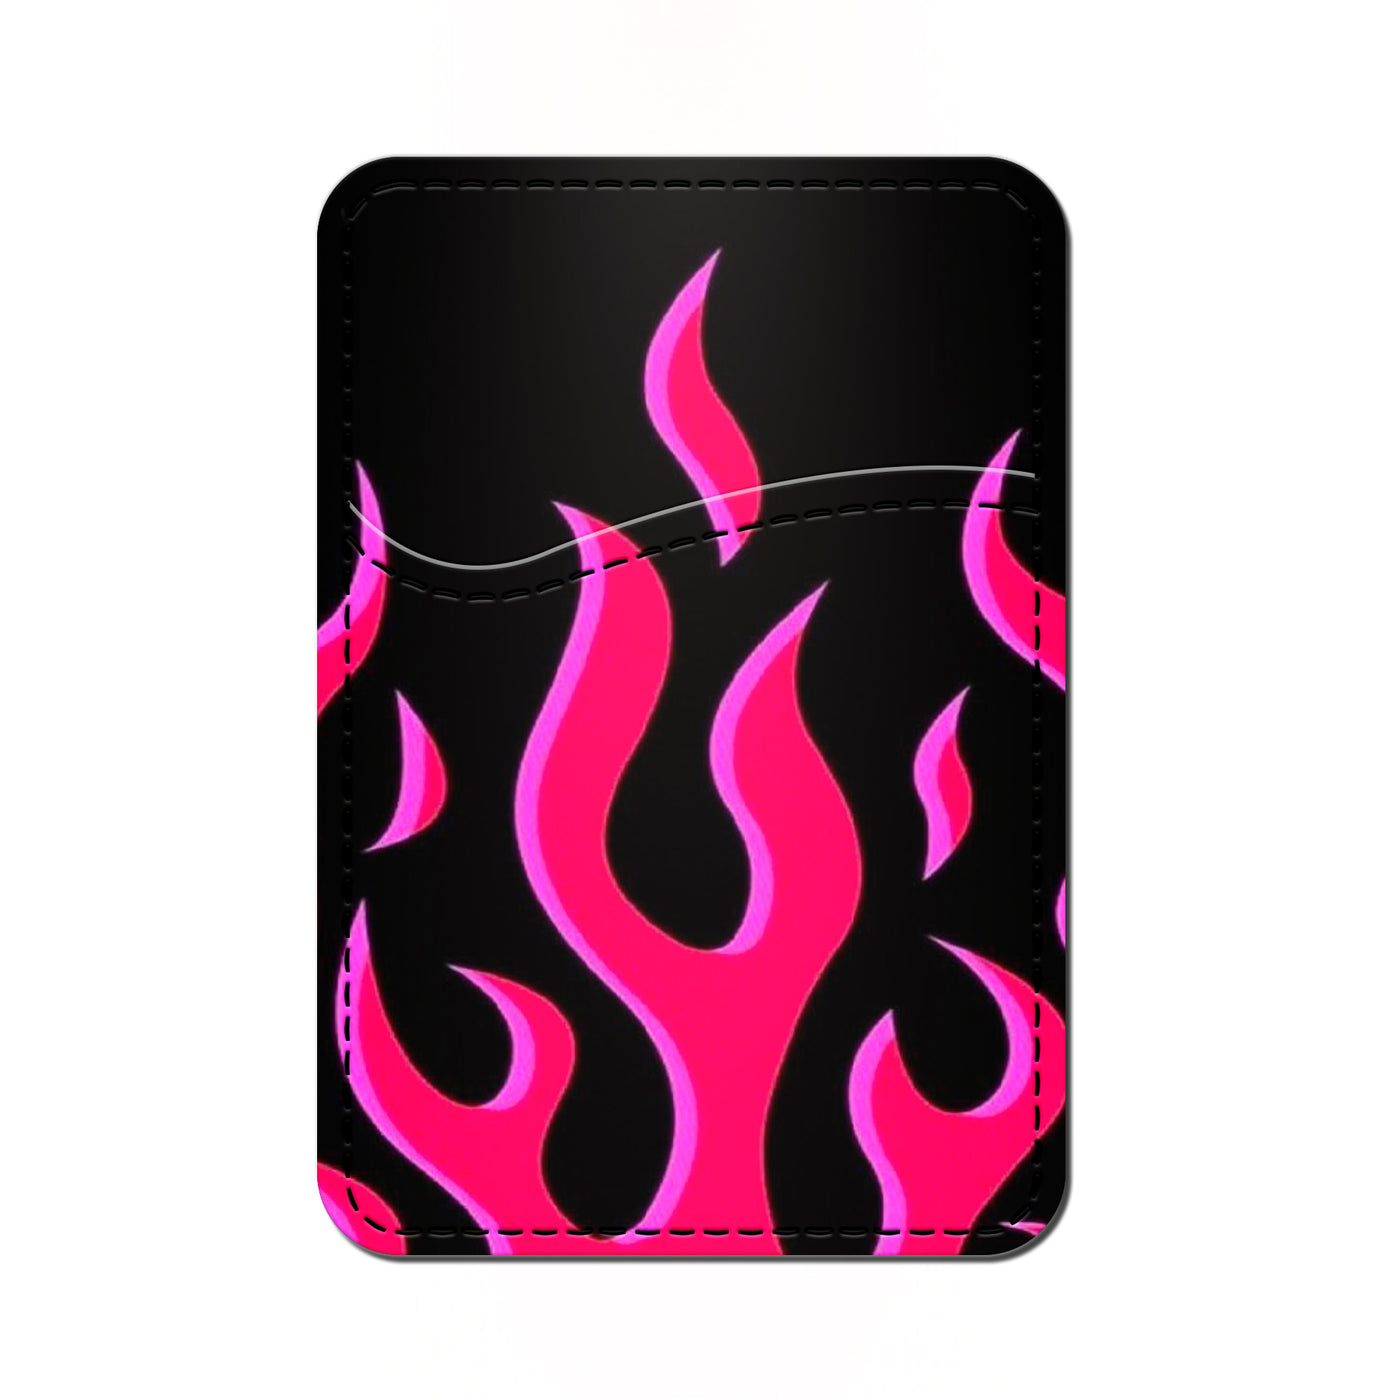 Card Wallet Pink flame pinterest inspired